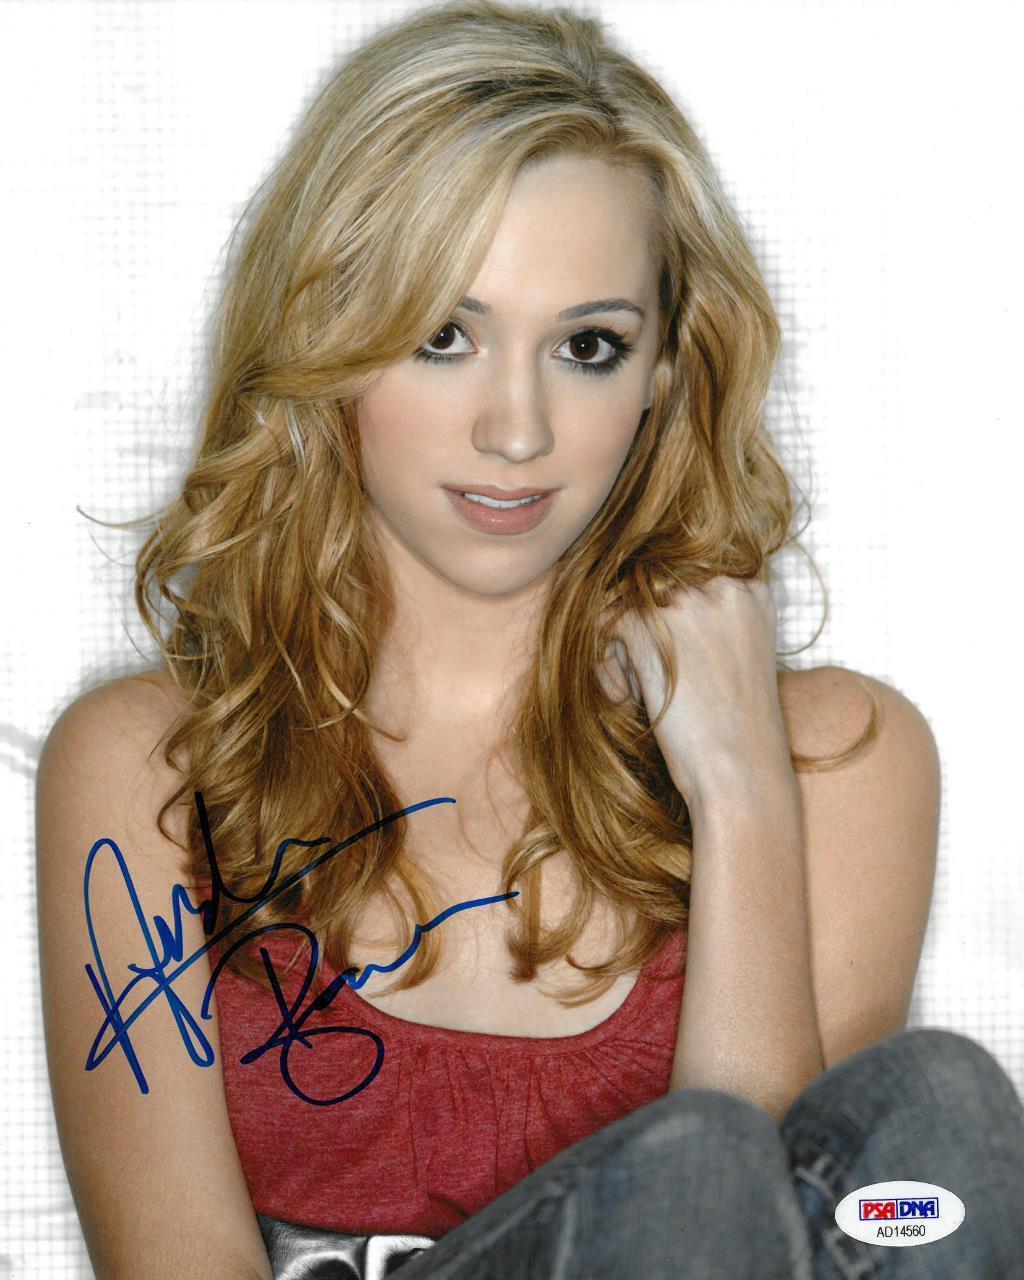 Andrea Bowen Signed Authentic Autographed 8x10 Photo Poster painting PSA/DNA #AD14560